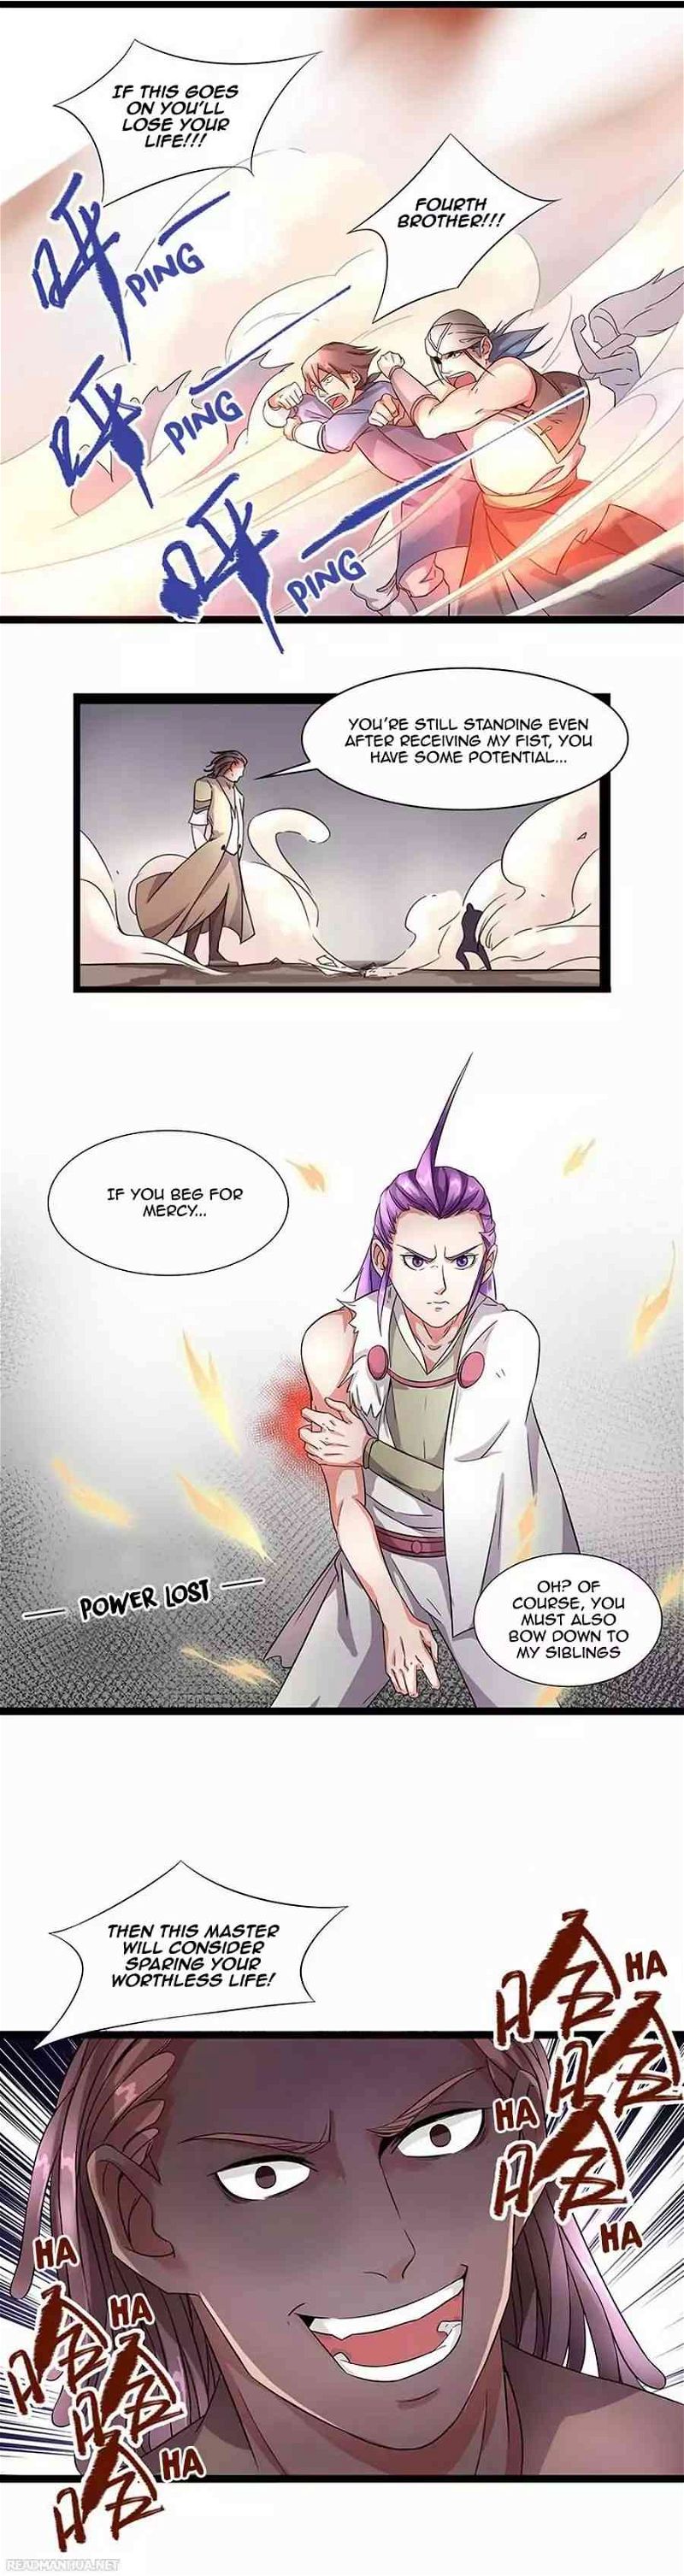 Chaotic Sword God Chapter 7 page 4